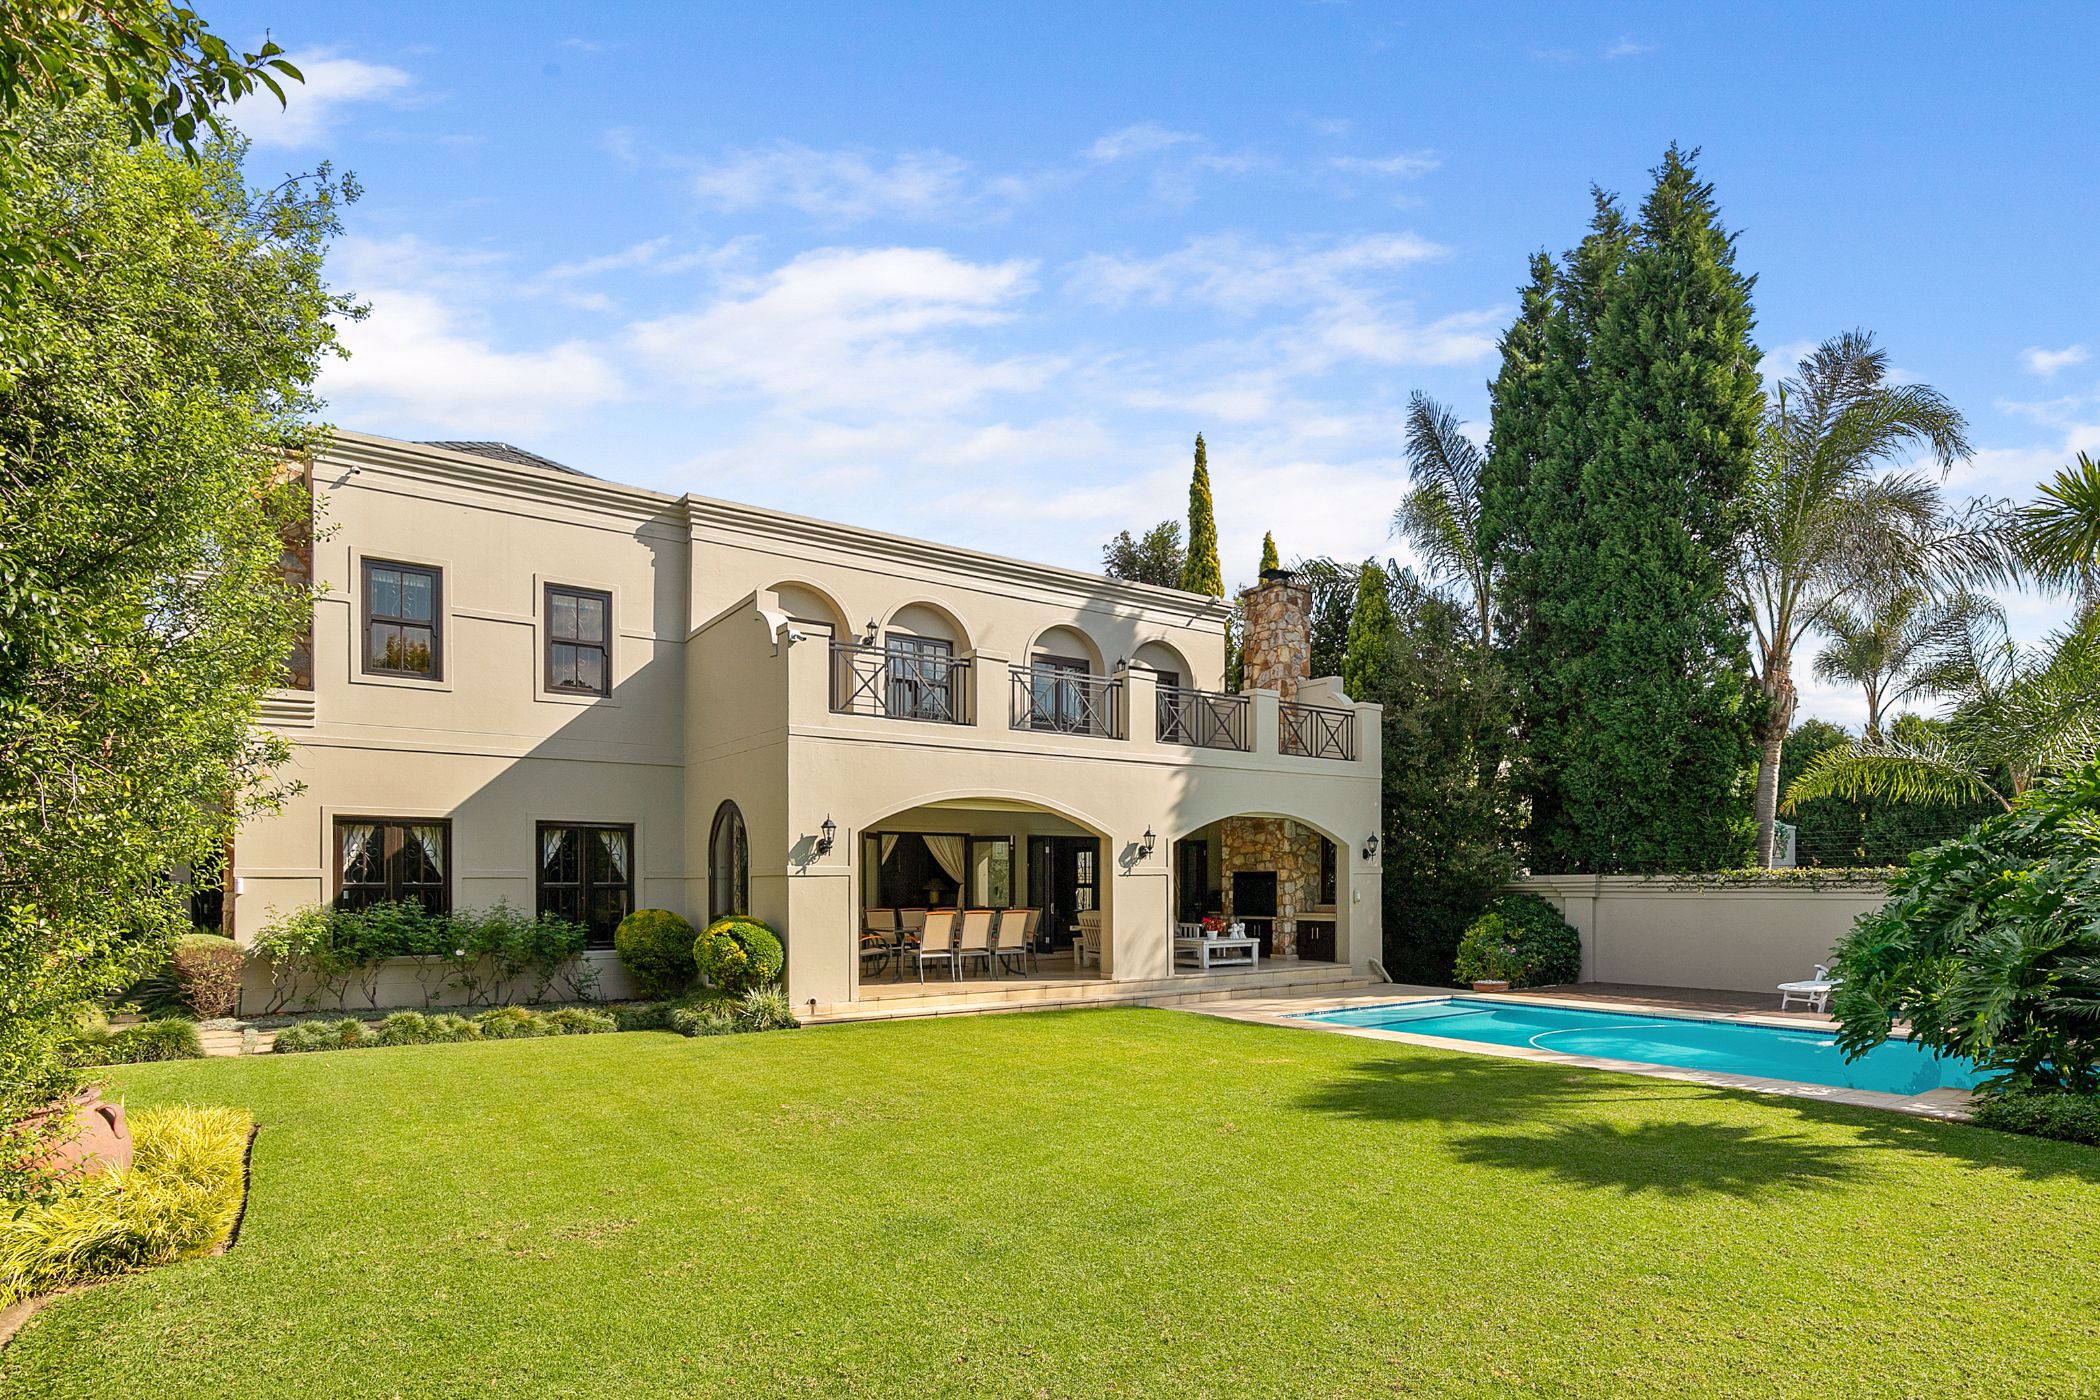 4 bedroom cluster house for sale in Bryanston